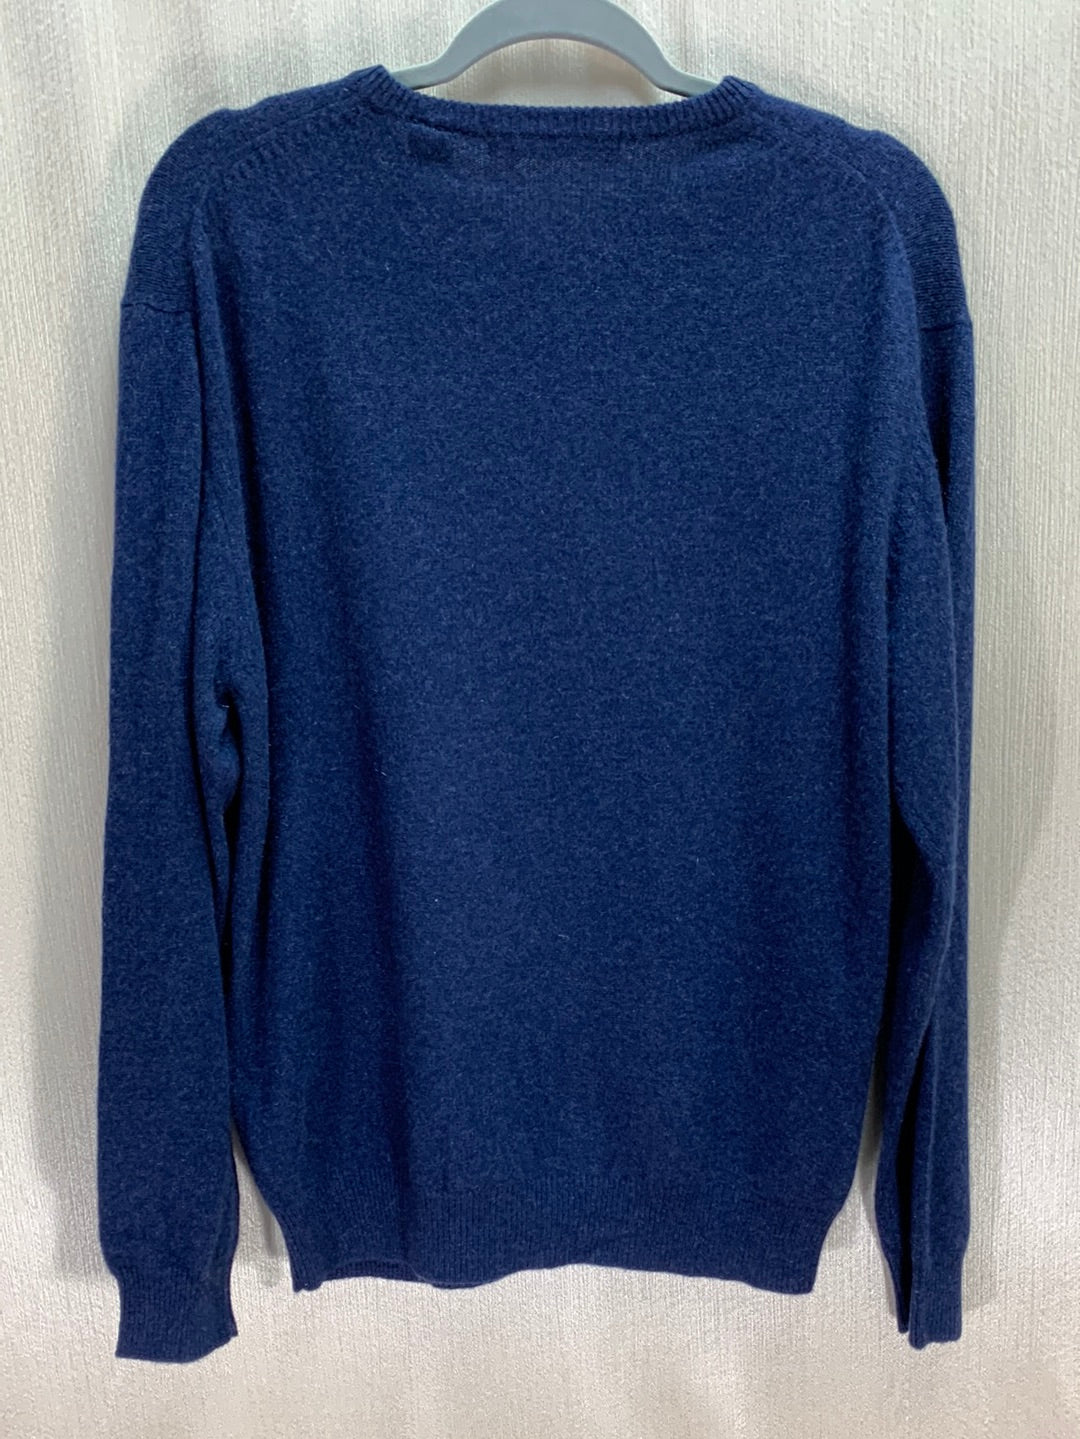 NWT - NORTHERN ISLES navy blue 100% Cashmere V-Neck Sweater - S